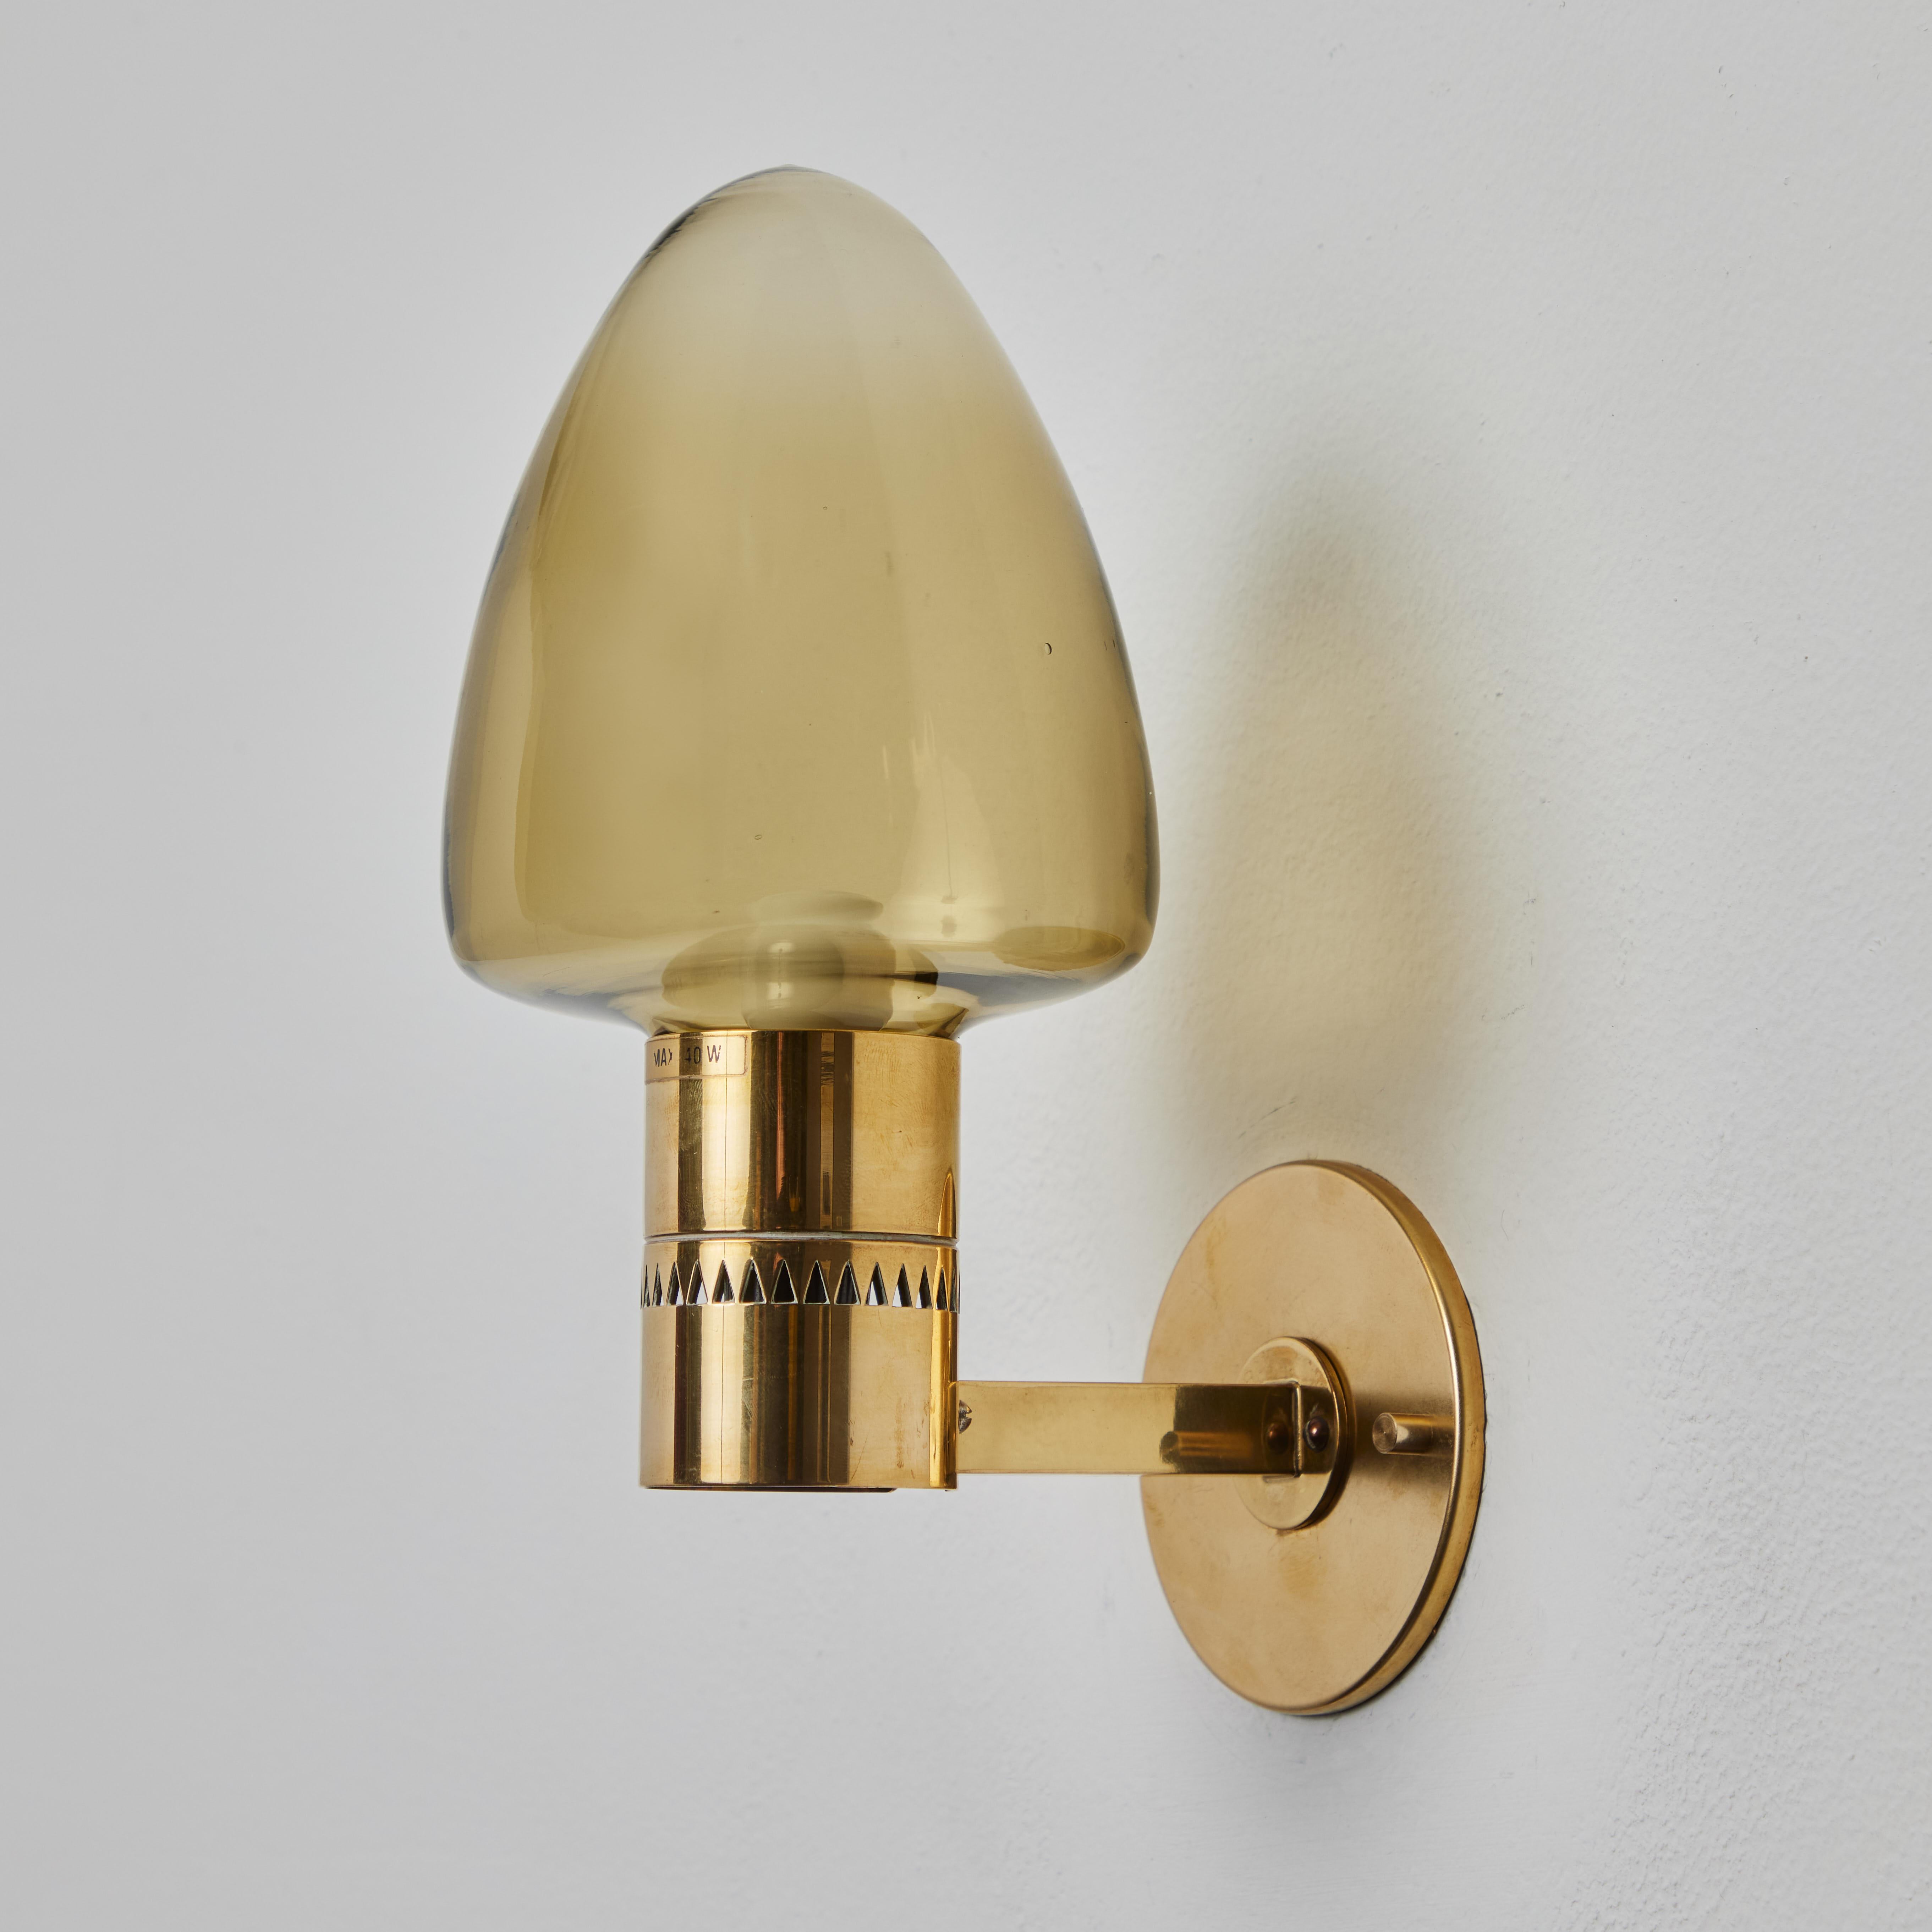 1960s Hans-Agne Jakobsson Model V-220 Brass & Glass Sconce for Markaryd. An incredibly refined vintage design that is quintessentially Swedish. Executed in sculpturally bent brass and blown smoked glass.

Price is per item. 3 lamps